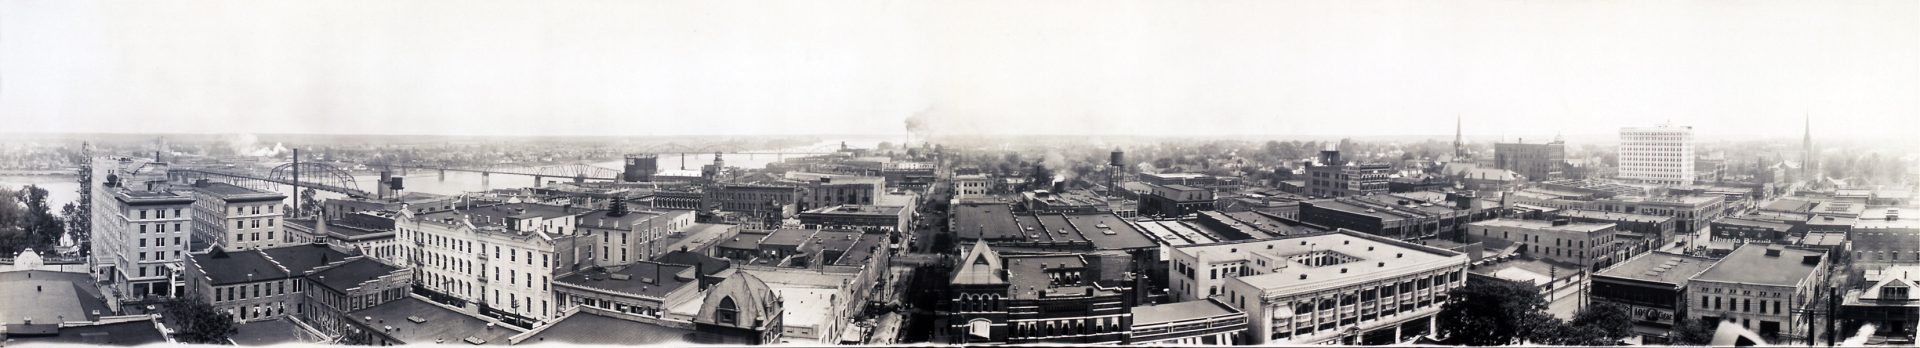 Panorama downtown Little Rock skyline with river to left three bridges and center factory smoke